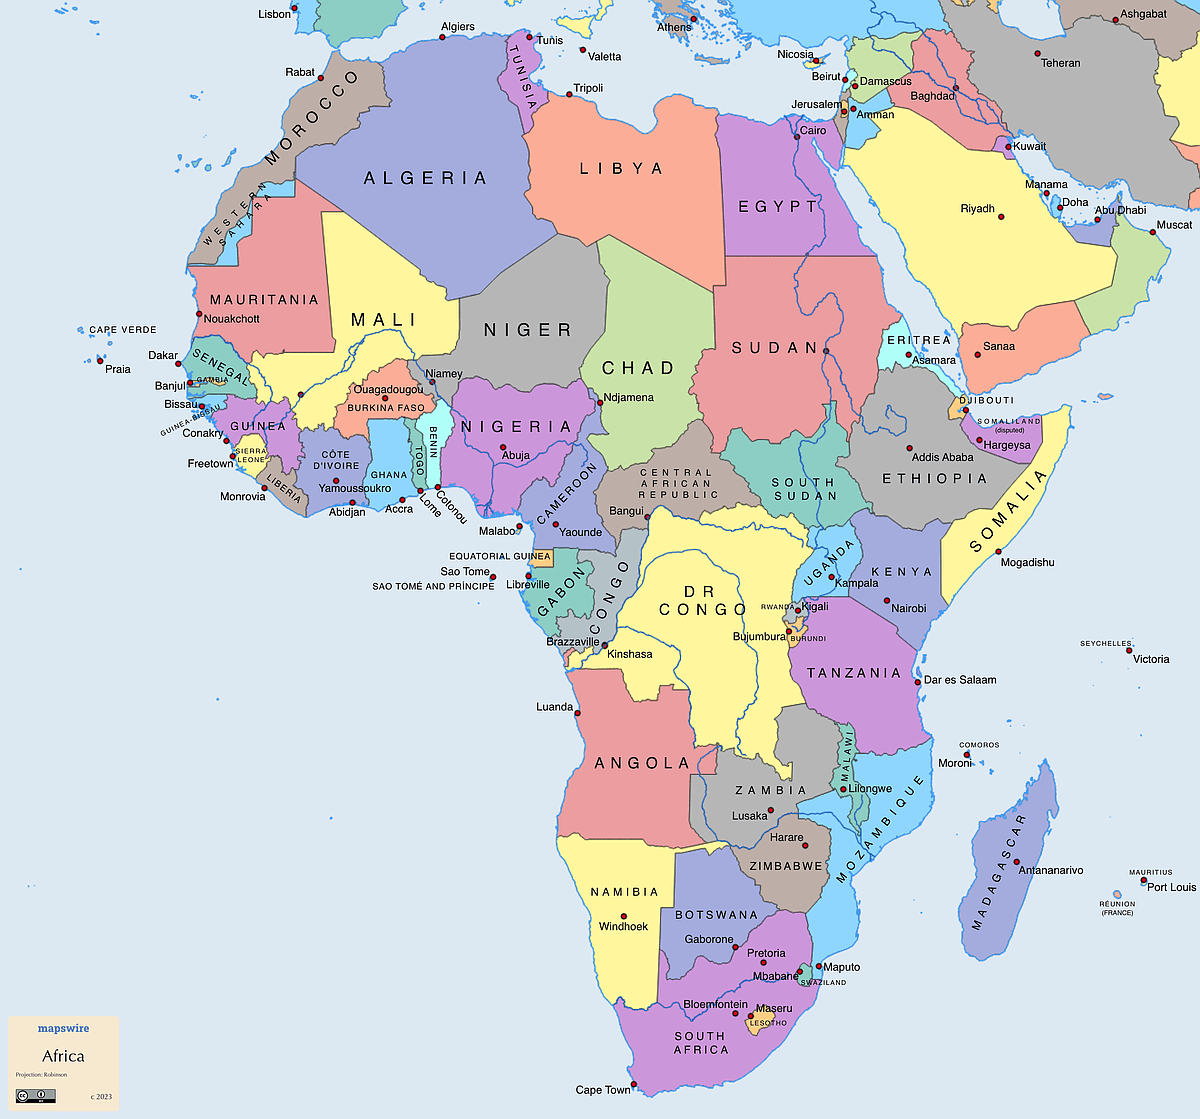 Free Maps of Africa | Mapswire